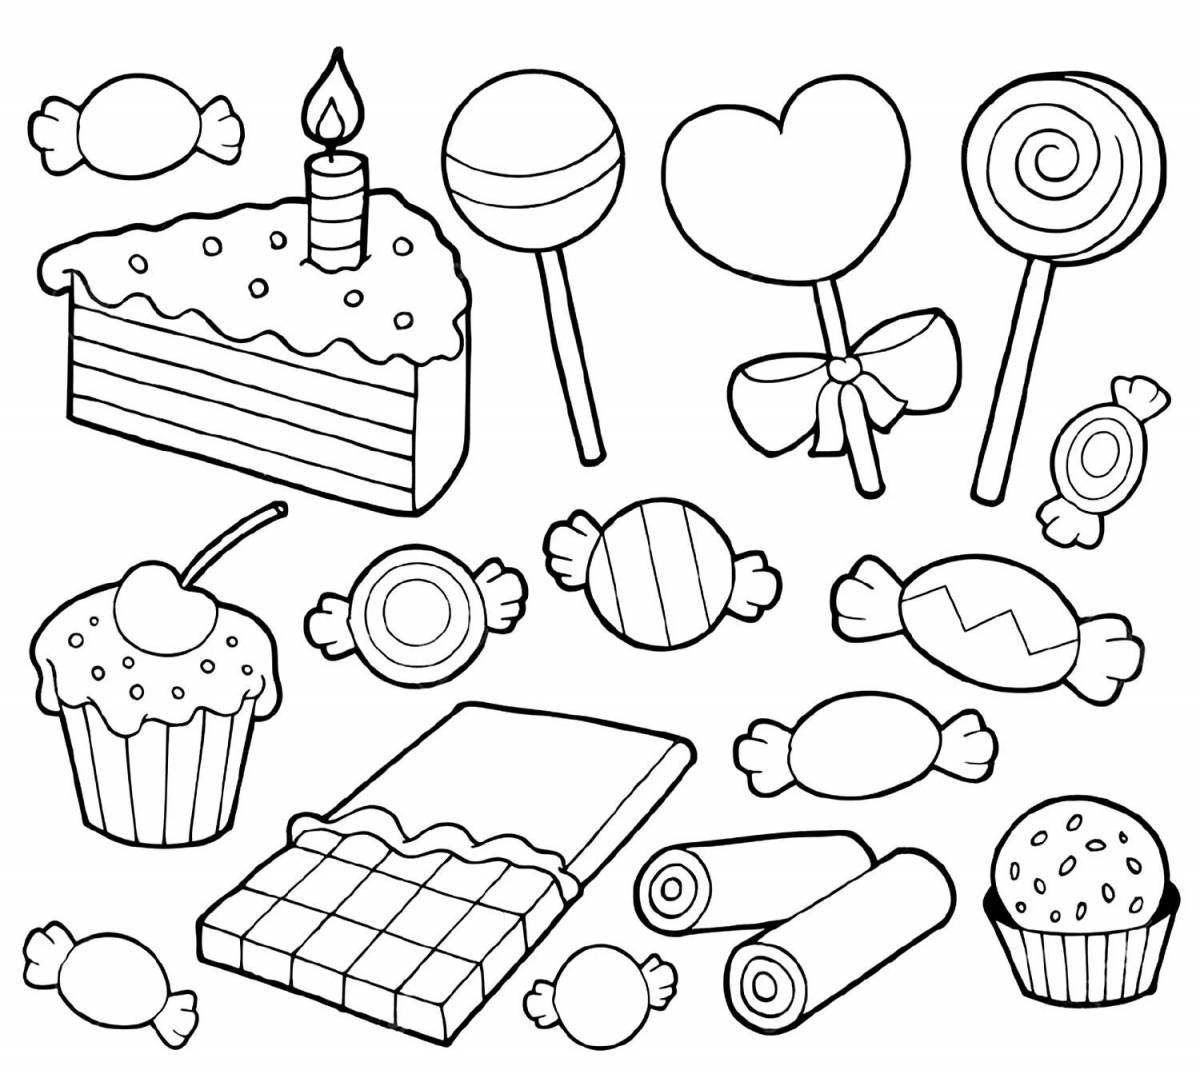 Colorful marmalade coloring page